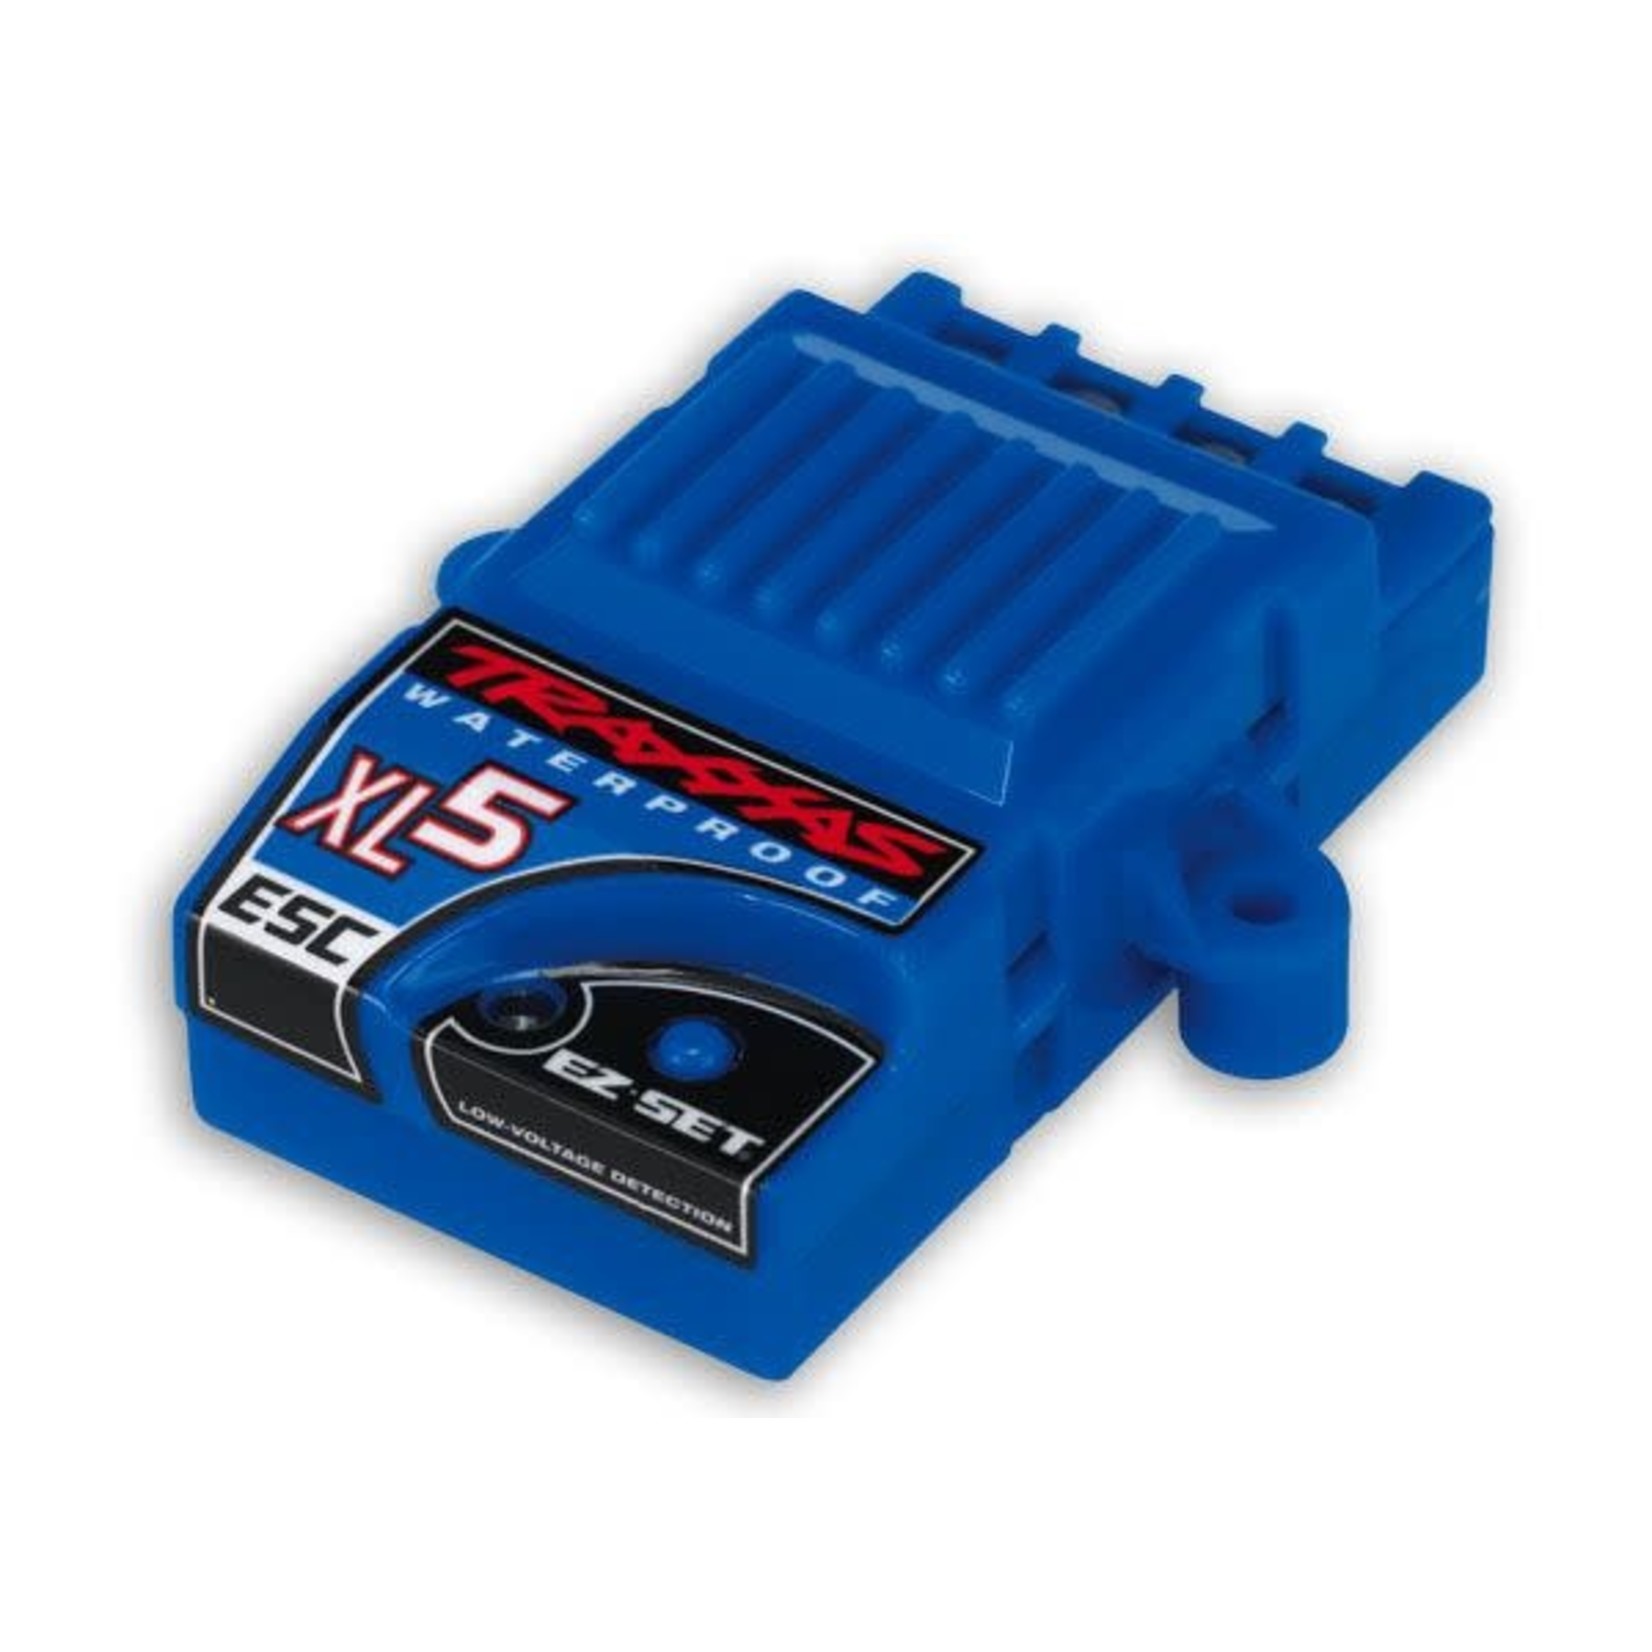 Traxxas XL-5 Electronic Speed Control, waterproof (land version, low-voltage detection, fwd/rev/brake)